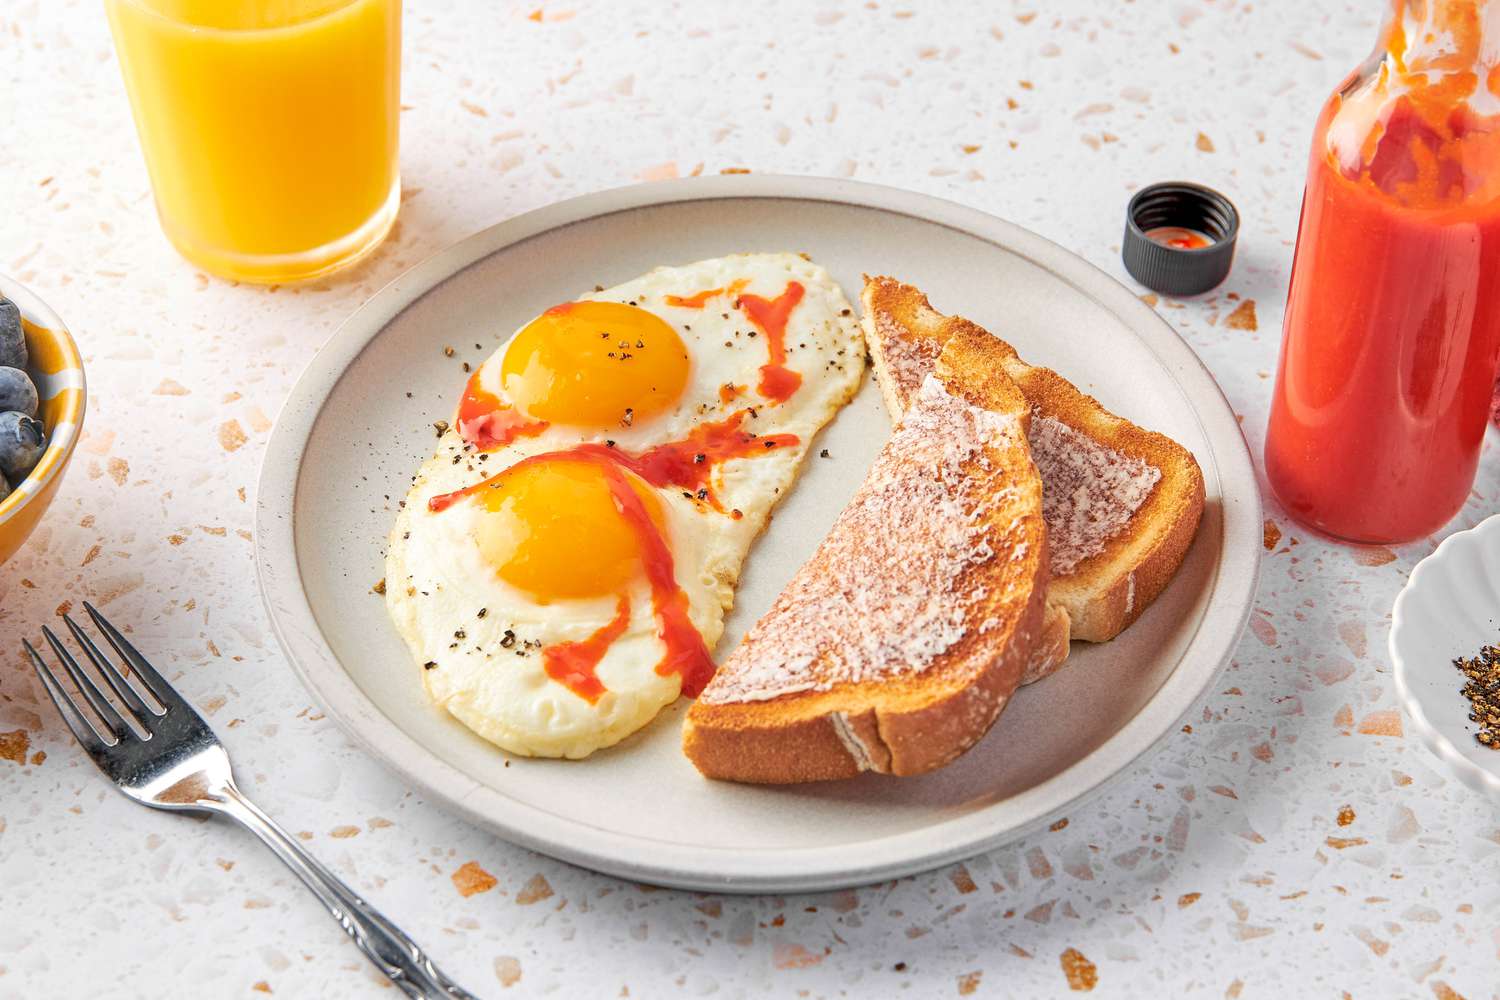 Plate With Two Sunny Side Eggs Topped With Homemade Hot Sauce and Cracked Pepper and Buttered Toast. In the Surroundings, an Open Bottle of Homemade Hot Sauce, a Glass of Orange Juice, a Bowl of Blueberries, and a Fork on the Counter